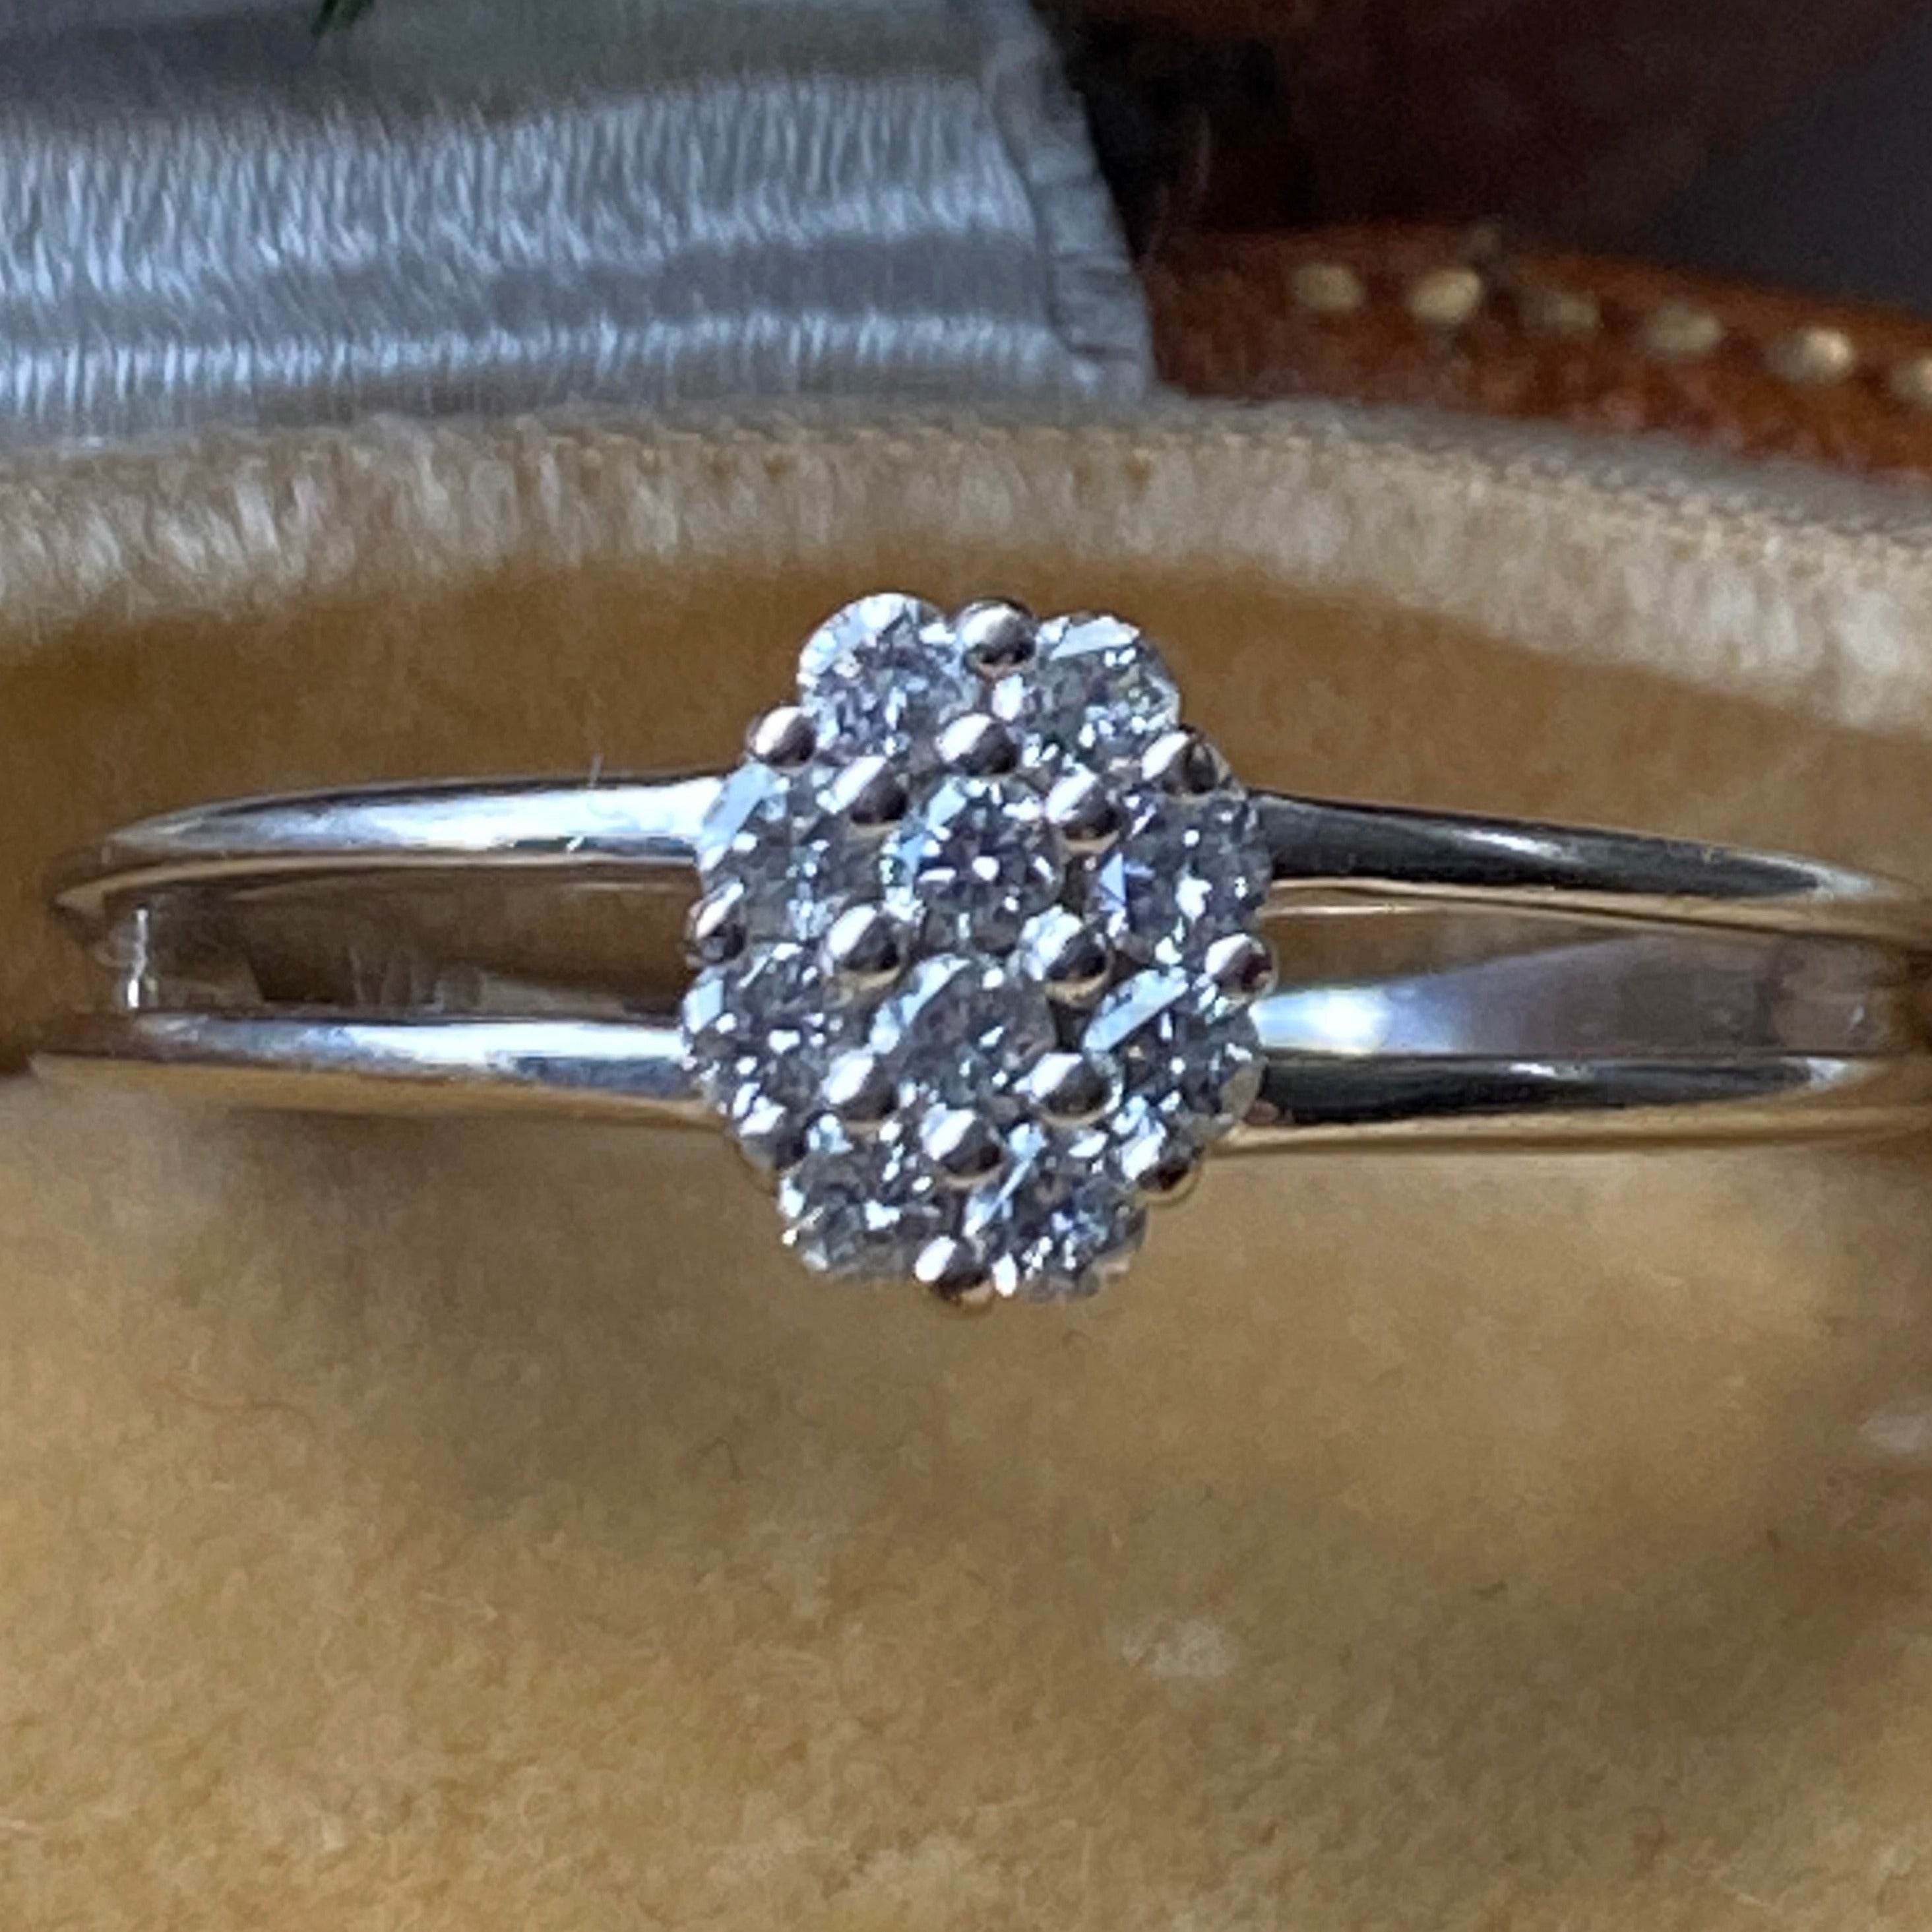 9ct White Gold Diamond Cluster Ring Size P or 7 3/4 US